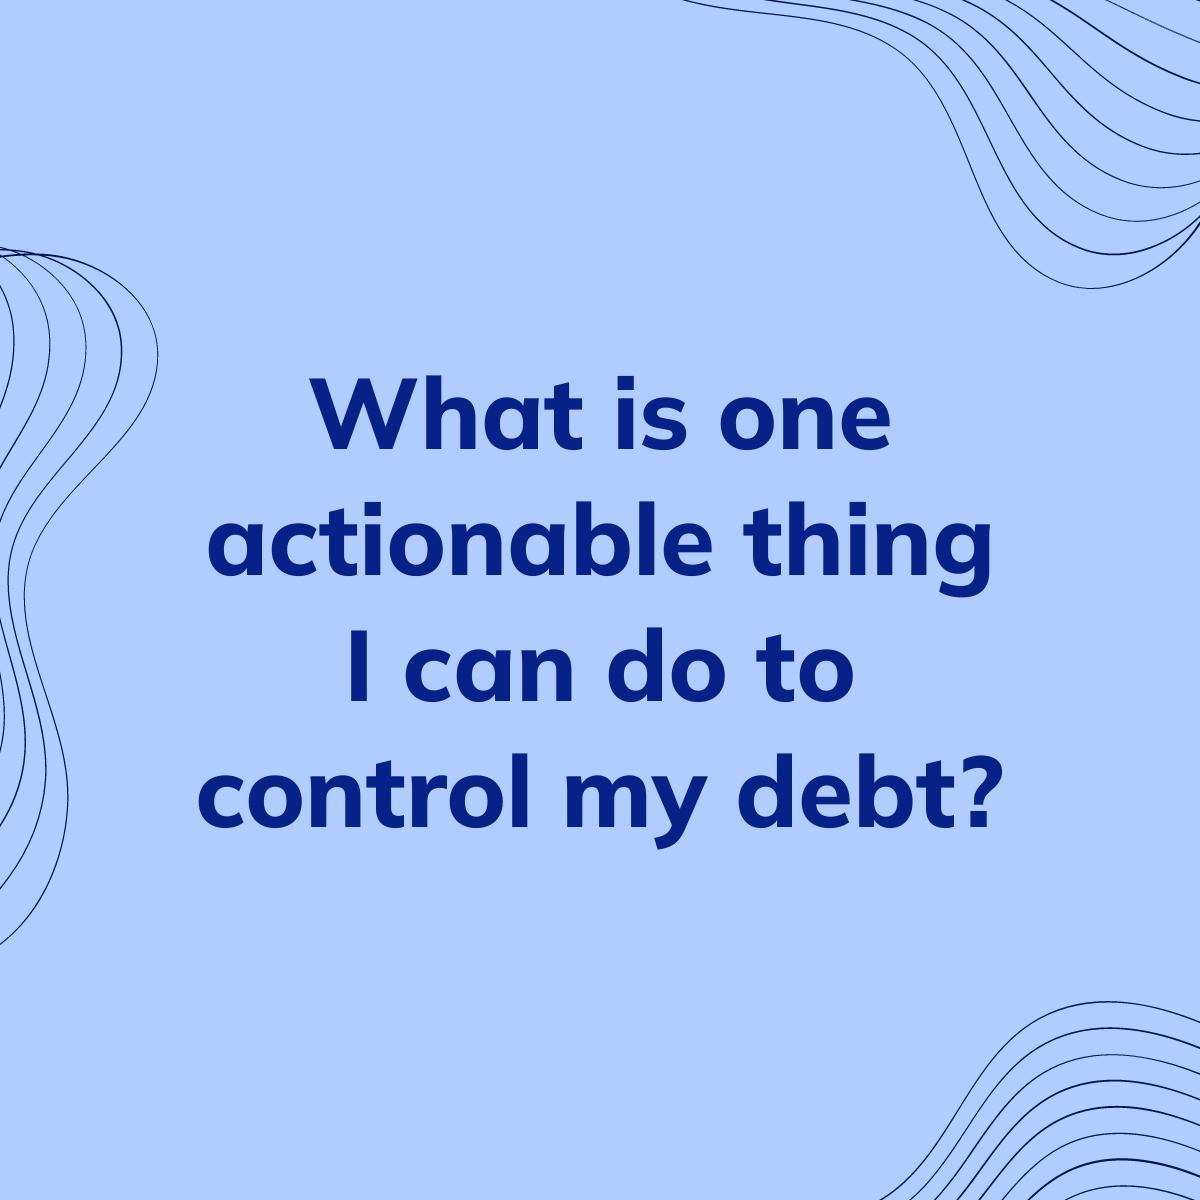 Journal Prompt: What is one actionable thing I can do to control my debt?